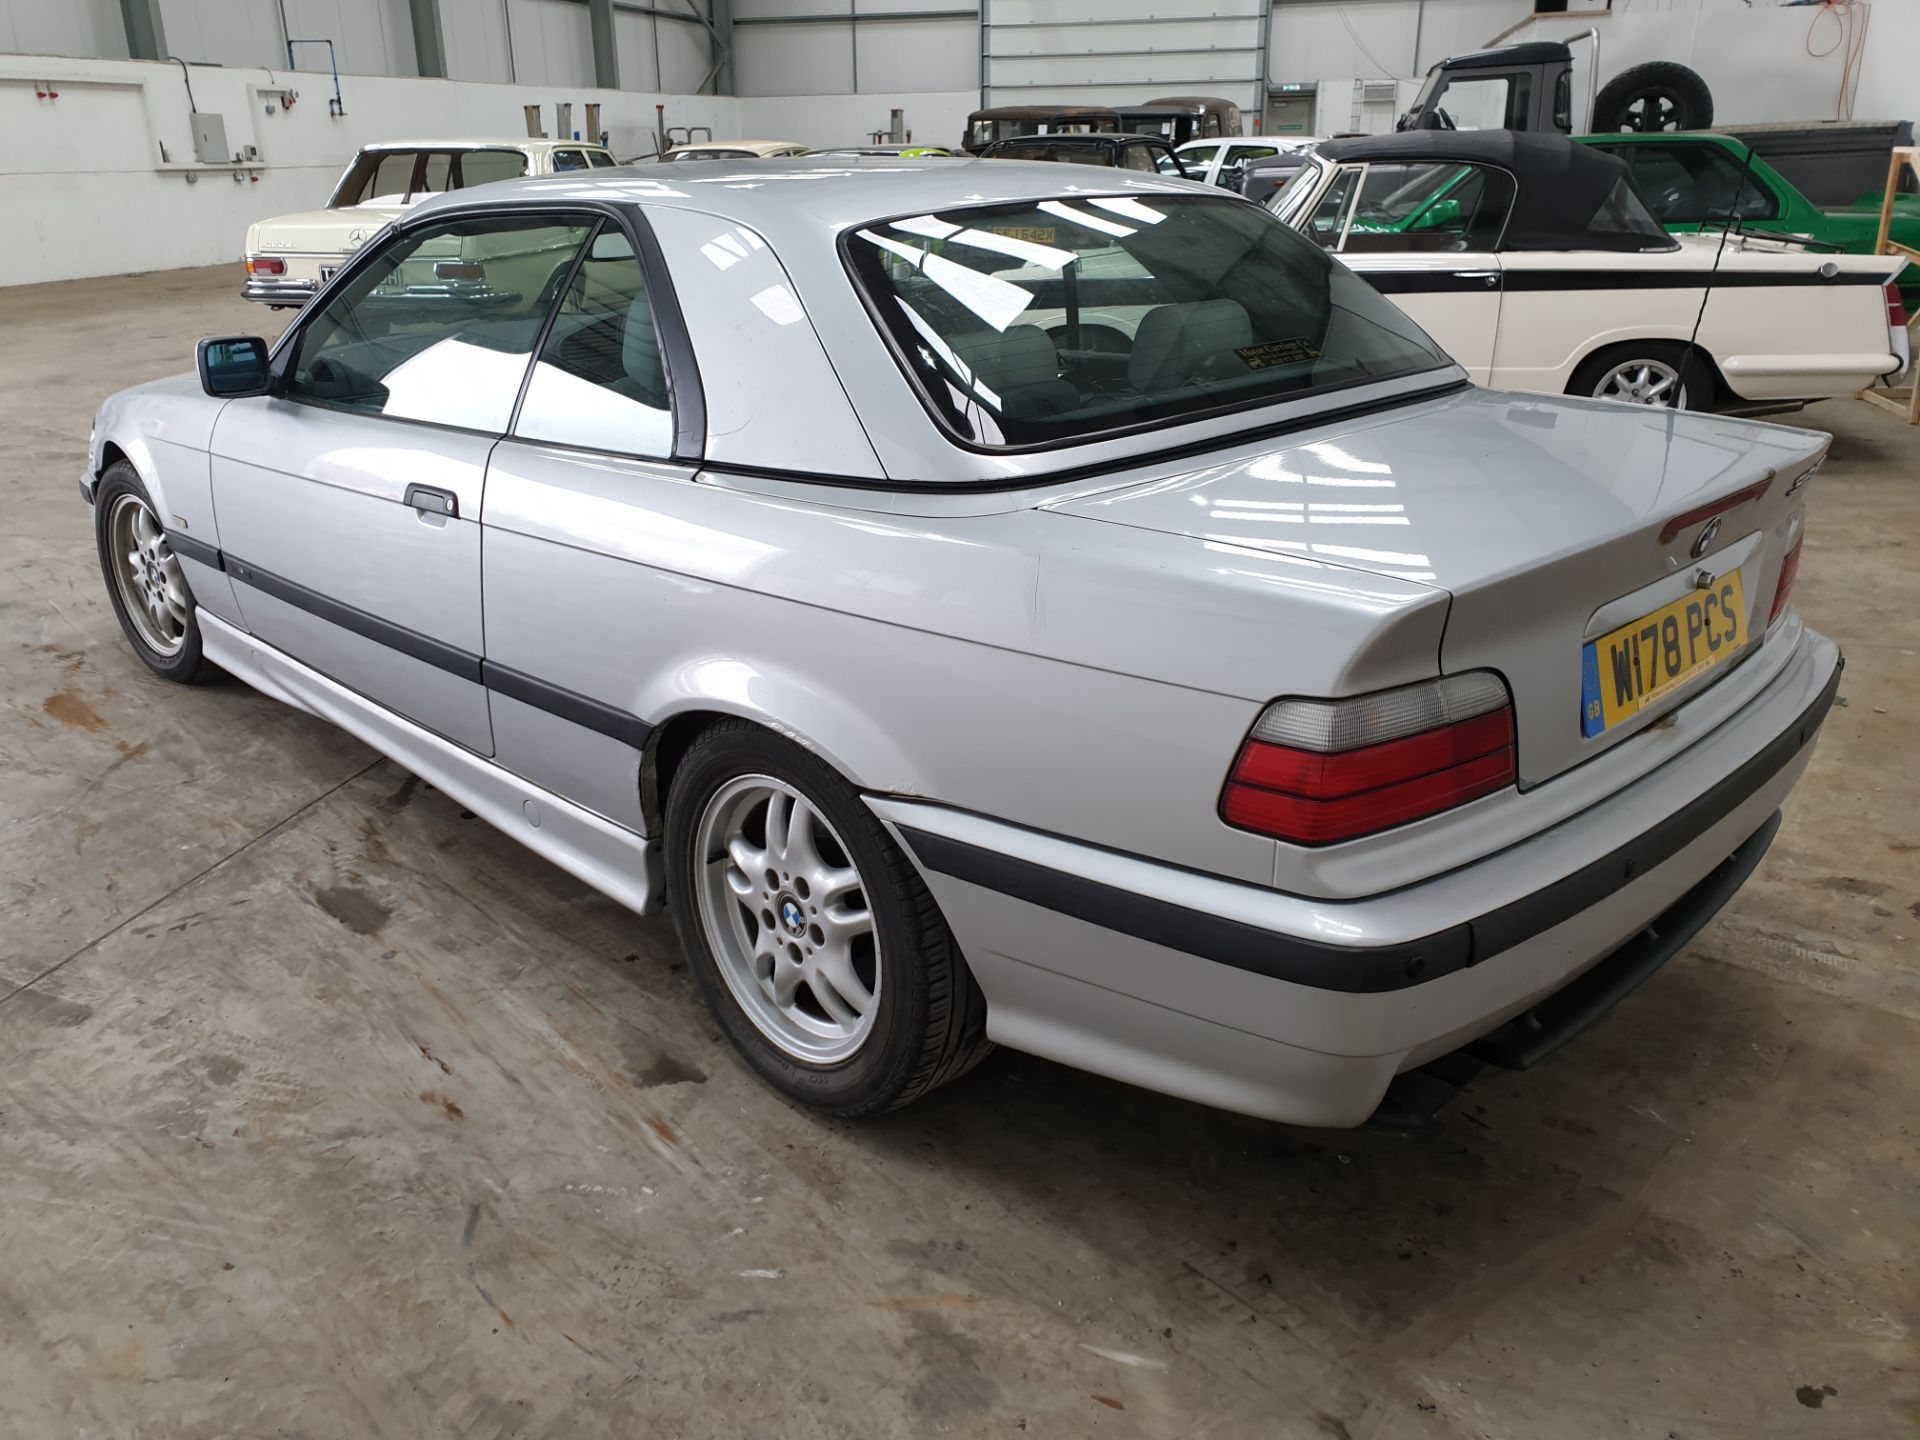 BMW 323 Convertible - Image 5 of 13